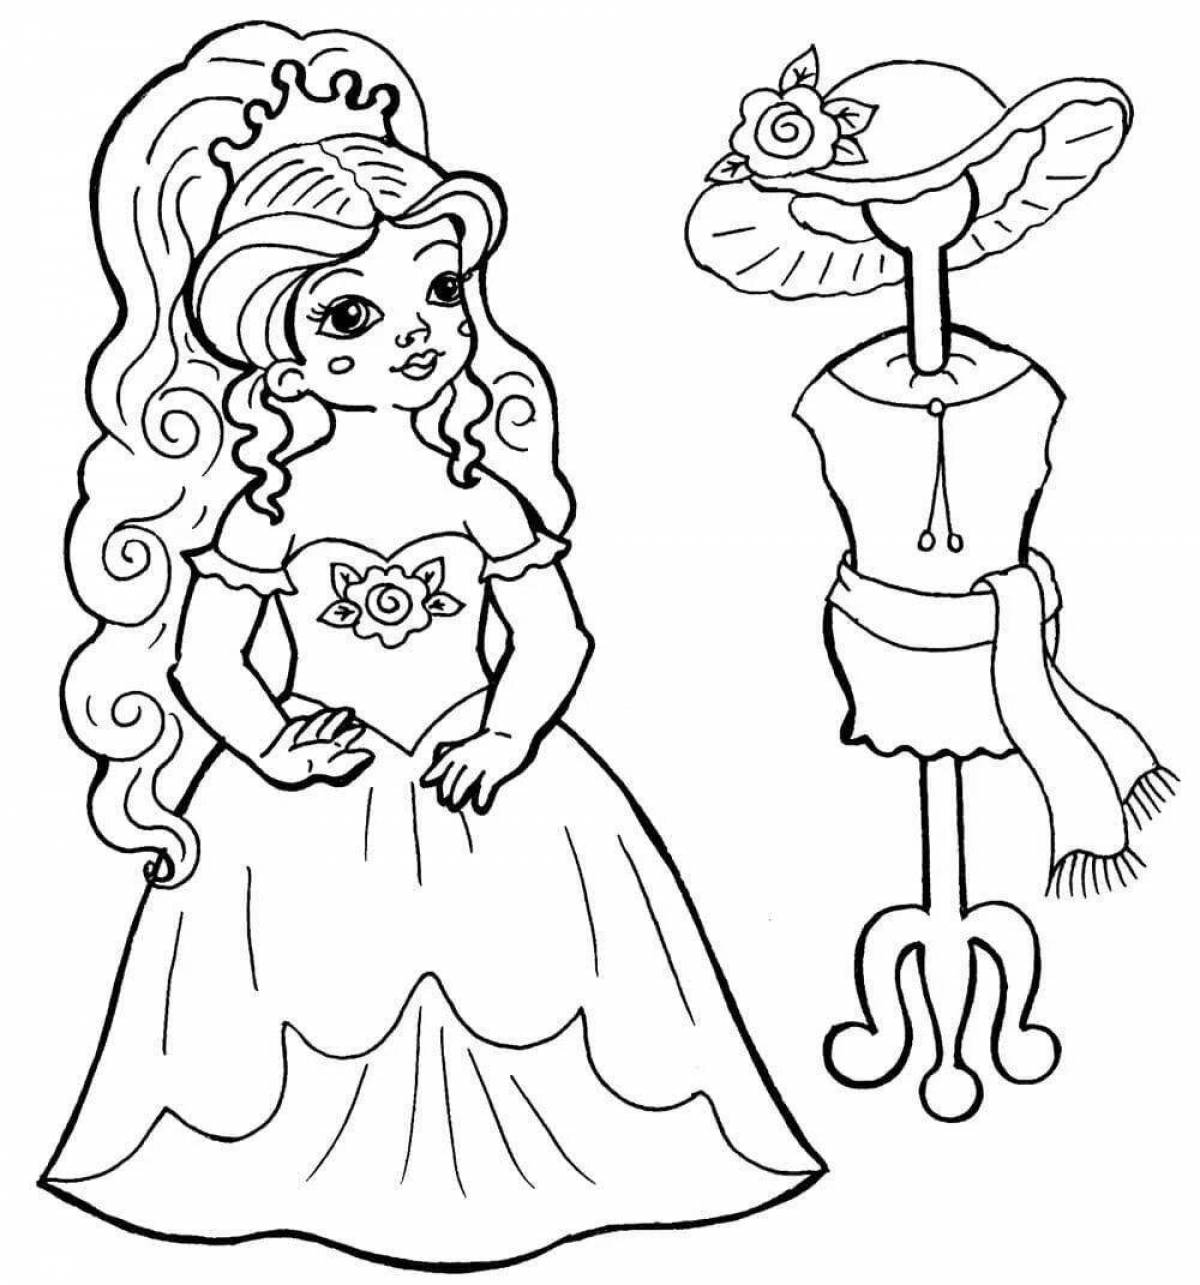 Inspirational coloring pages for 5 year old girls